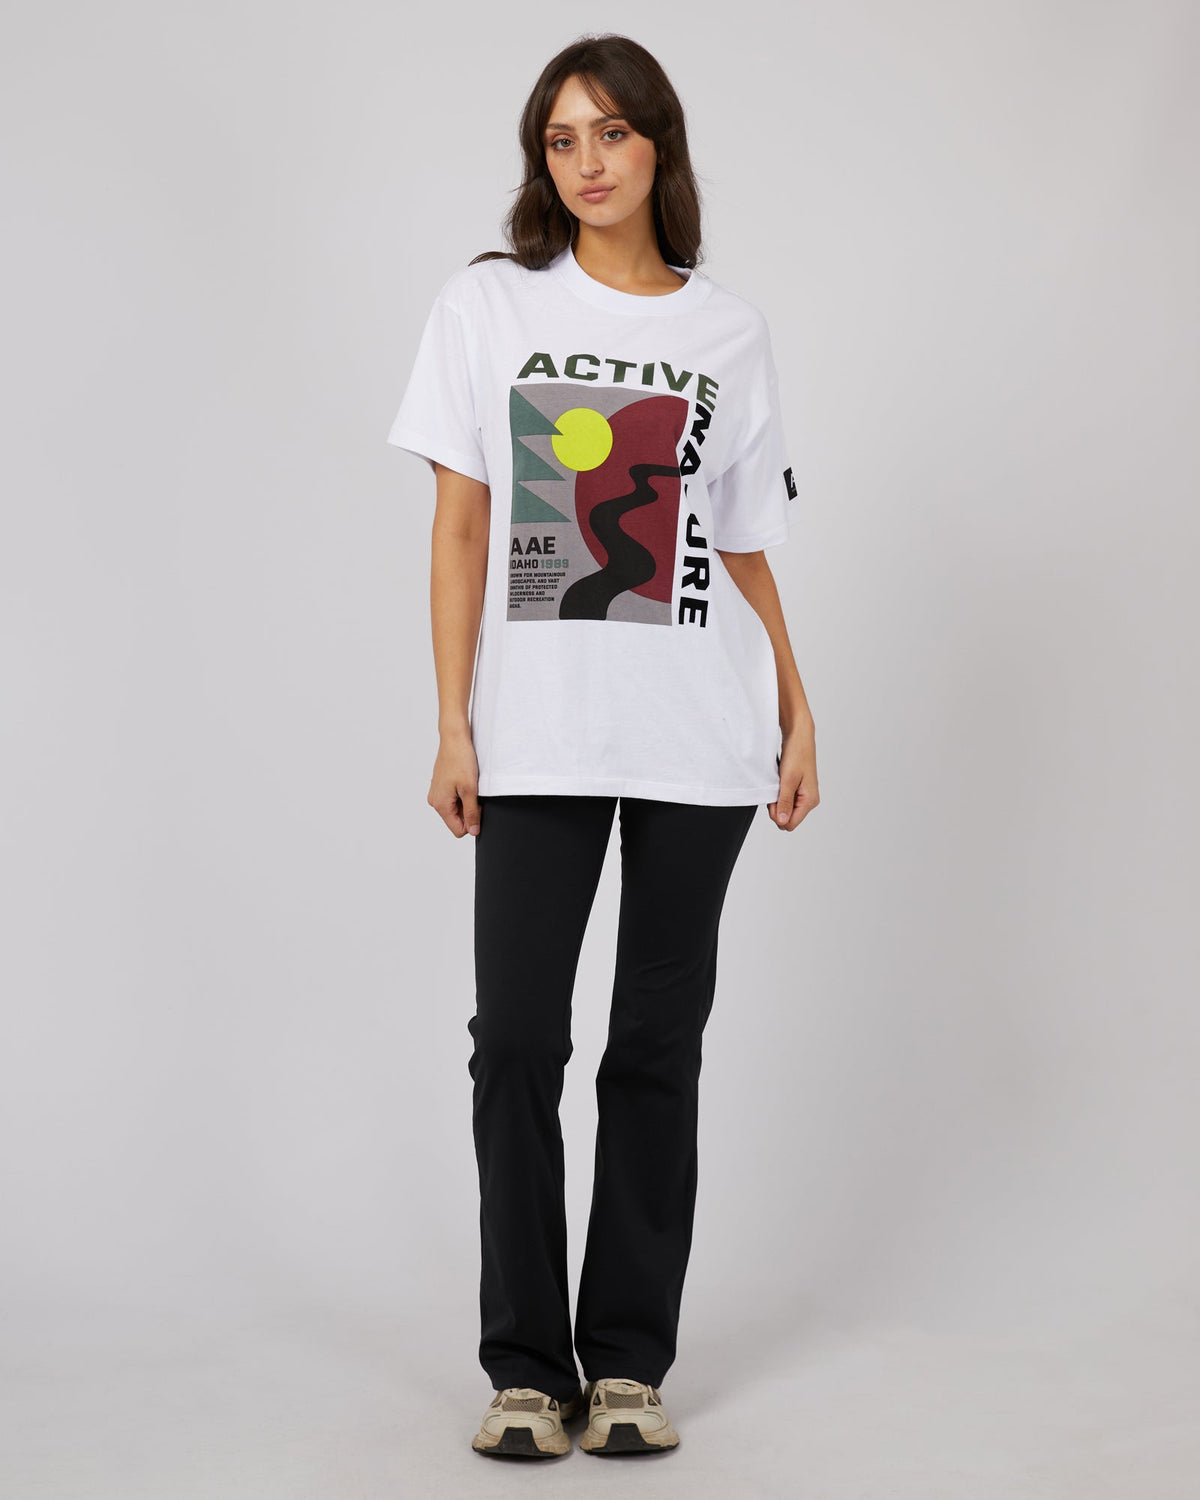 All About Eve-National Tee Vintage White-Edge Clothing